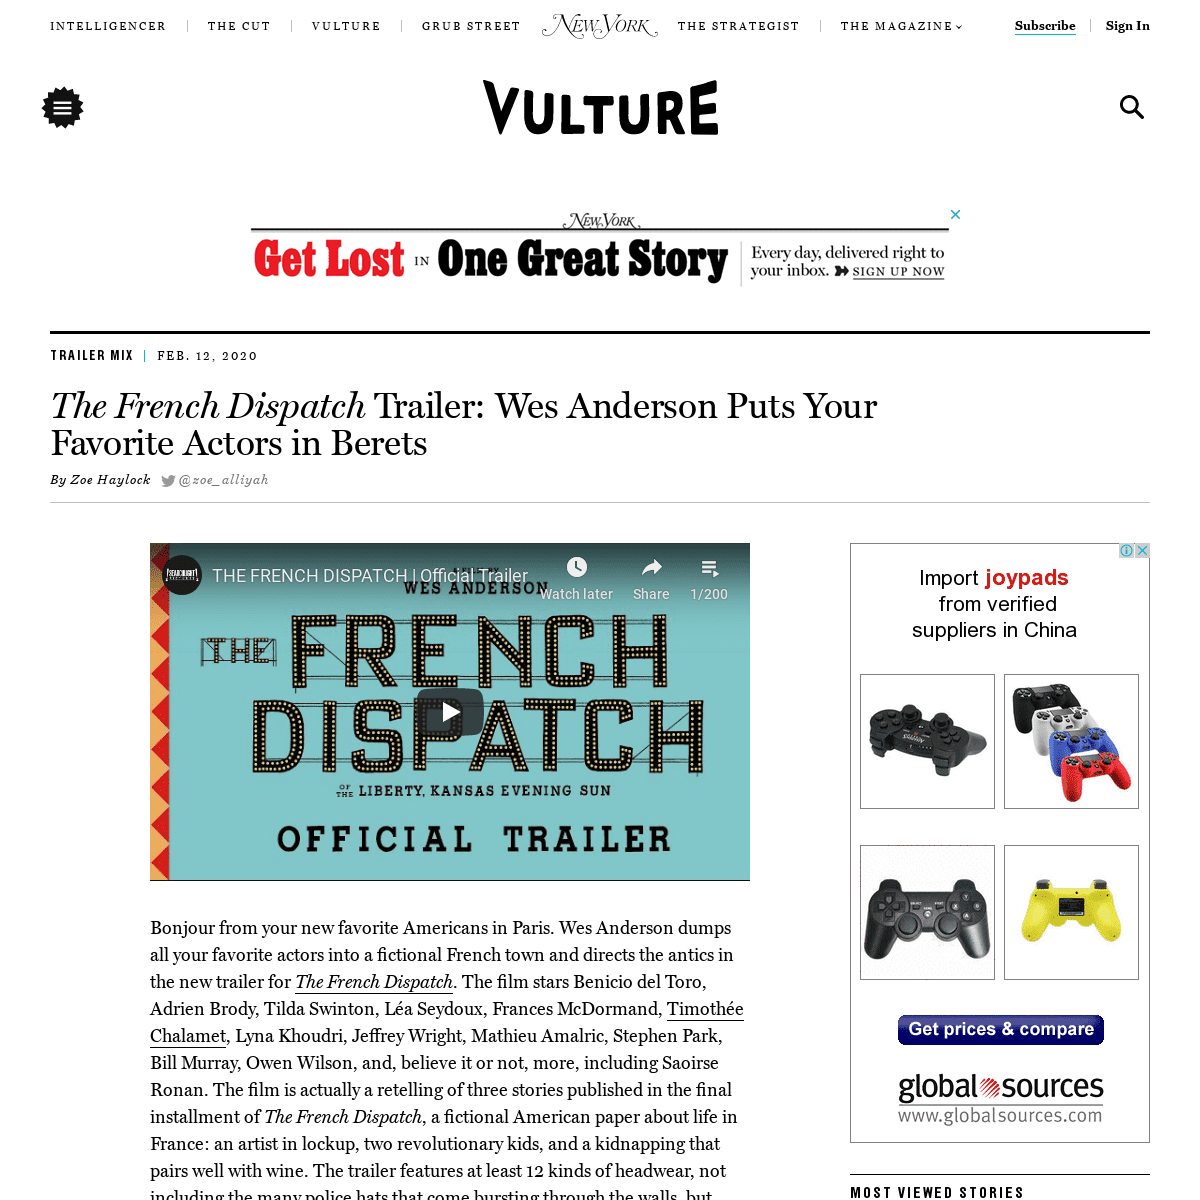 A complete backup of www.vulture.com/2020/02/wes-anderson-the-french-dispatch-trailer.html